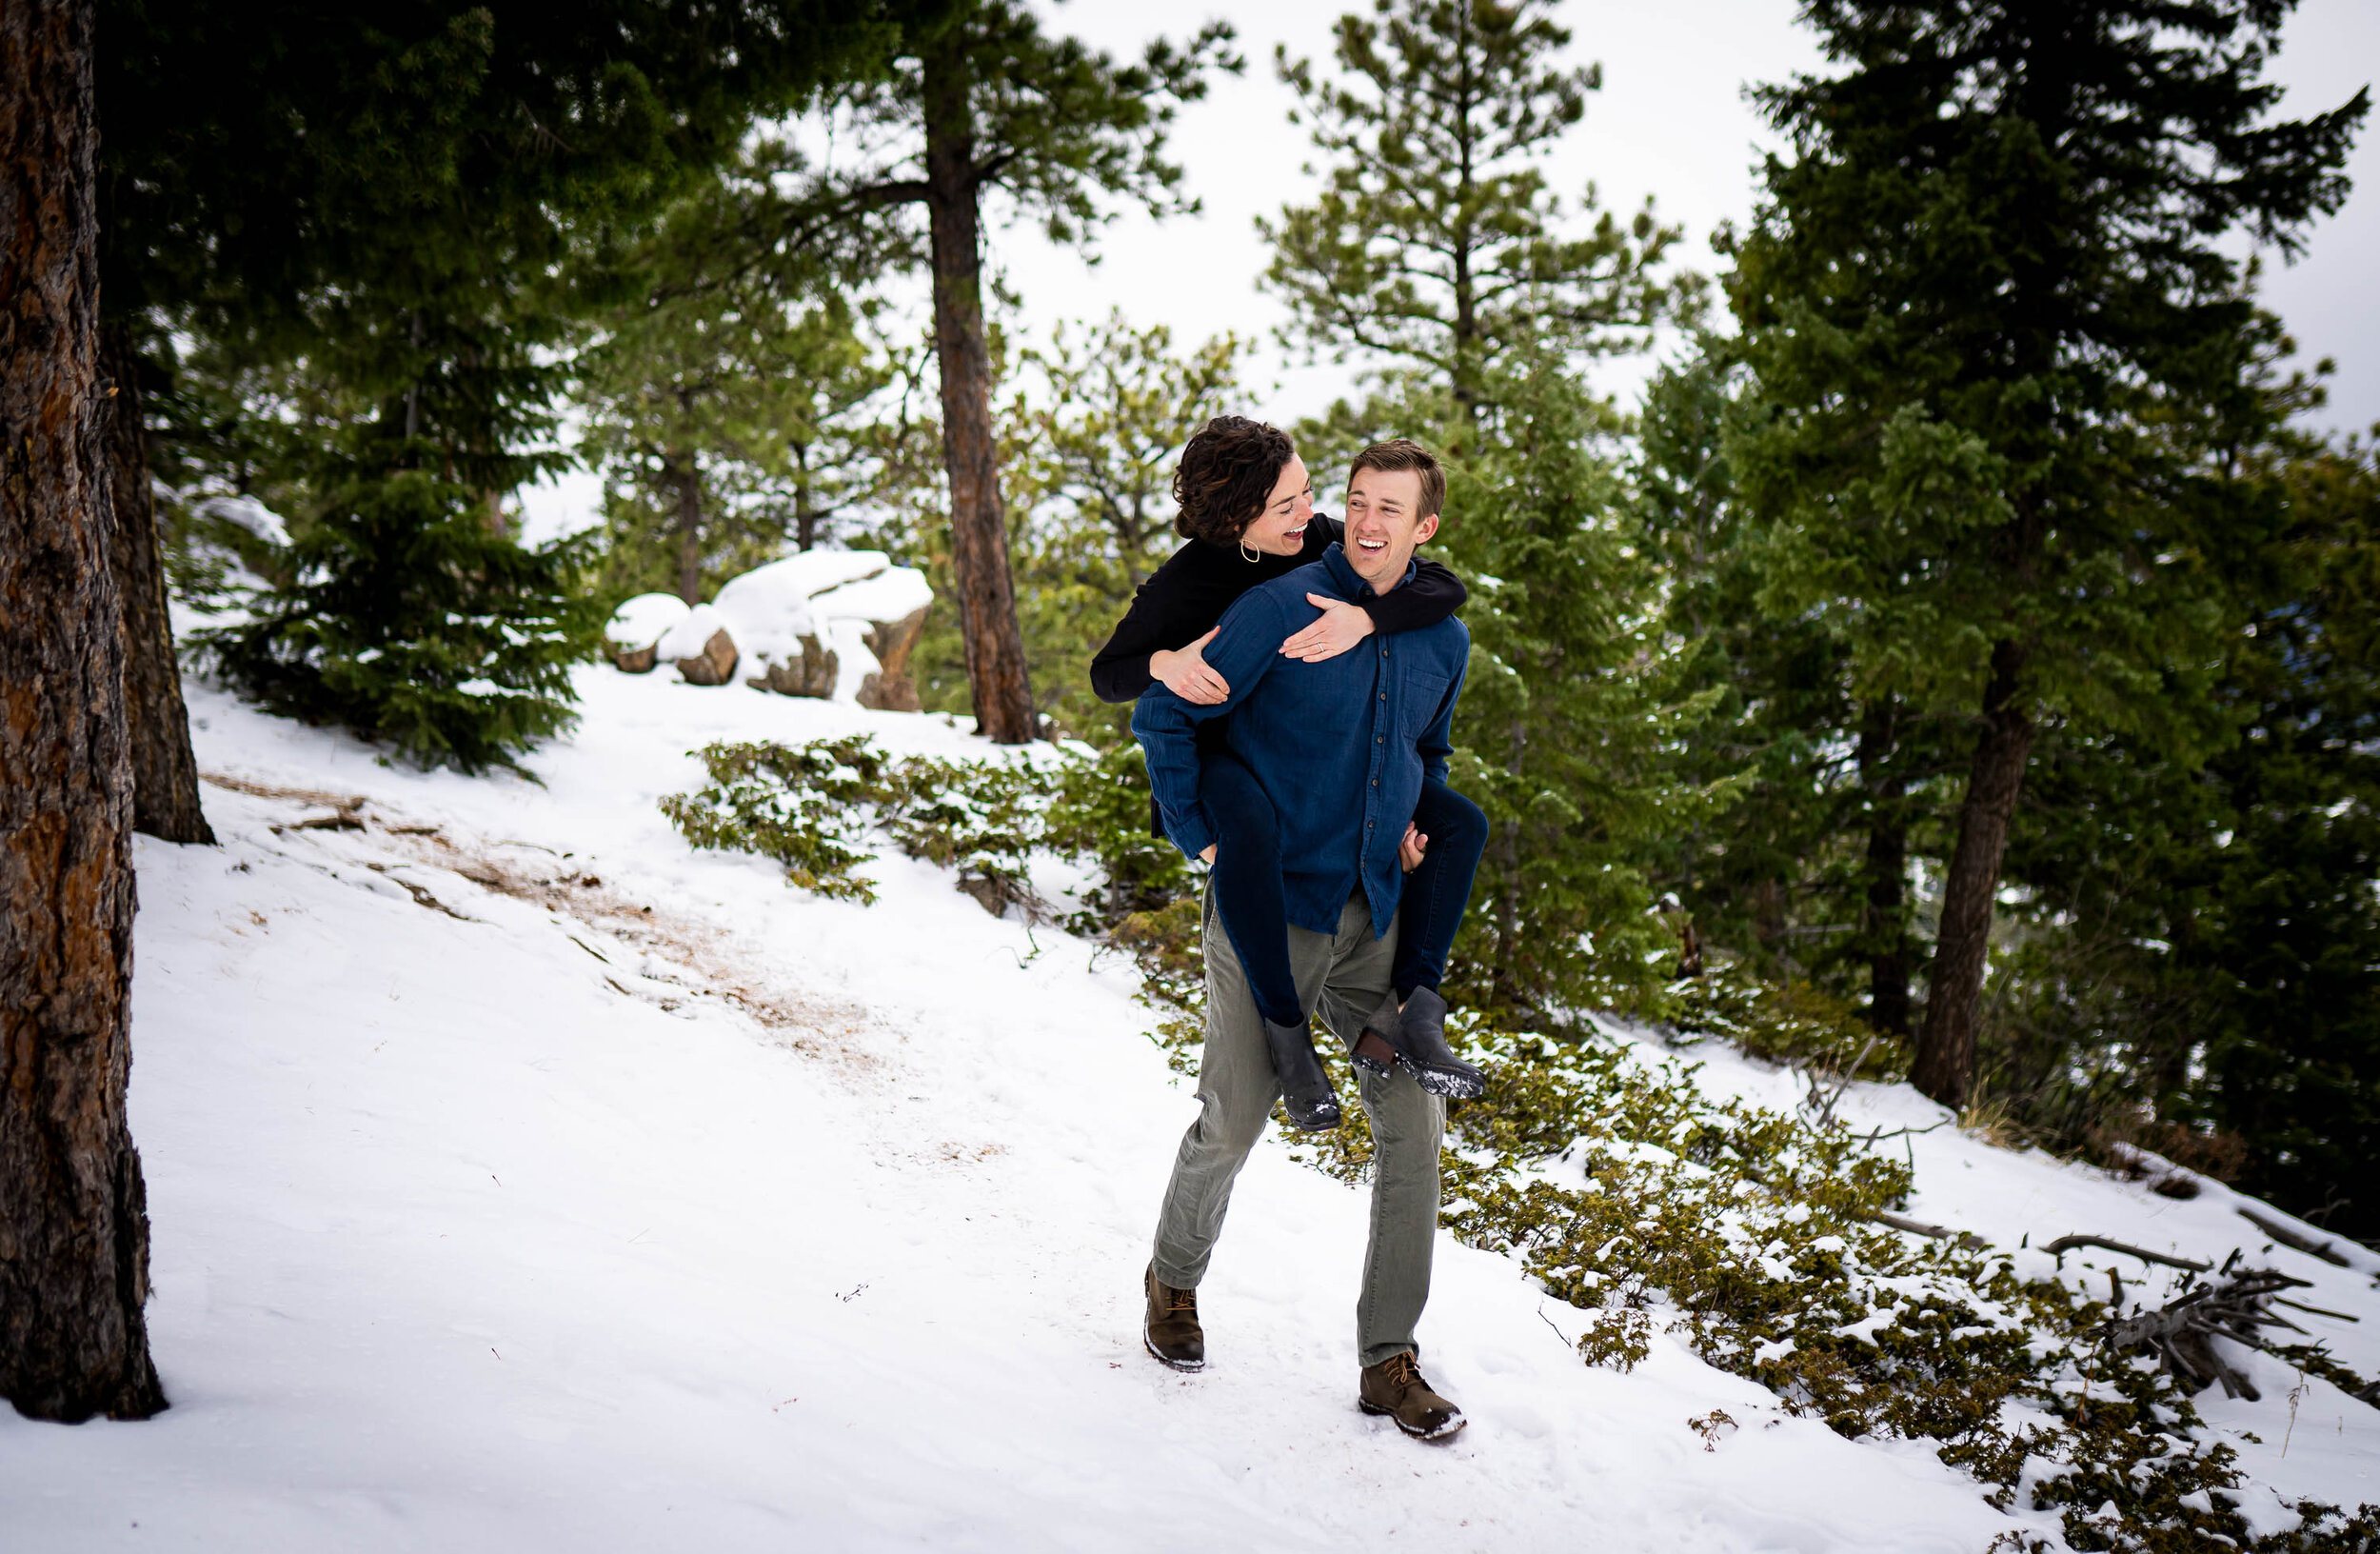 Engaged couple walks while holding hands in the snow in a dense evergreen mountain forest, Engagement Session, Engagement Photos, Engagement Photos Inspiration, Engagement Photography, Engagement Photographer, Winter Engagement Photos, Mountain Engagement Photos, Lost Gulch Overlook engagement session, Lost Gulch Overlook engagement photos, Lost Gulch Overlook engagement photography, Lost Gulch Overlook engagement photographer, Lost Gulch Overlook  engagement inspiration, Boulder engagement session, Boulder engagement photos, Boulder engagement photography, Boulder engagement photographer, Boulder engagement inspiration, Colorado engagement session, Colorado engagement photos, Colorado engagement photography, Colorado engagement photographer, Colorado engagement inspiration